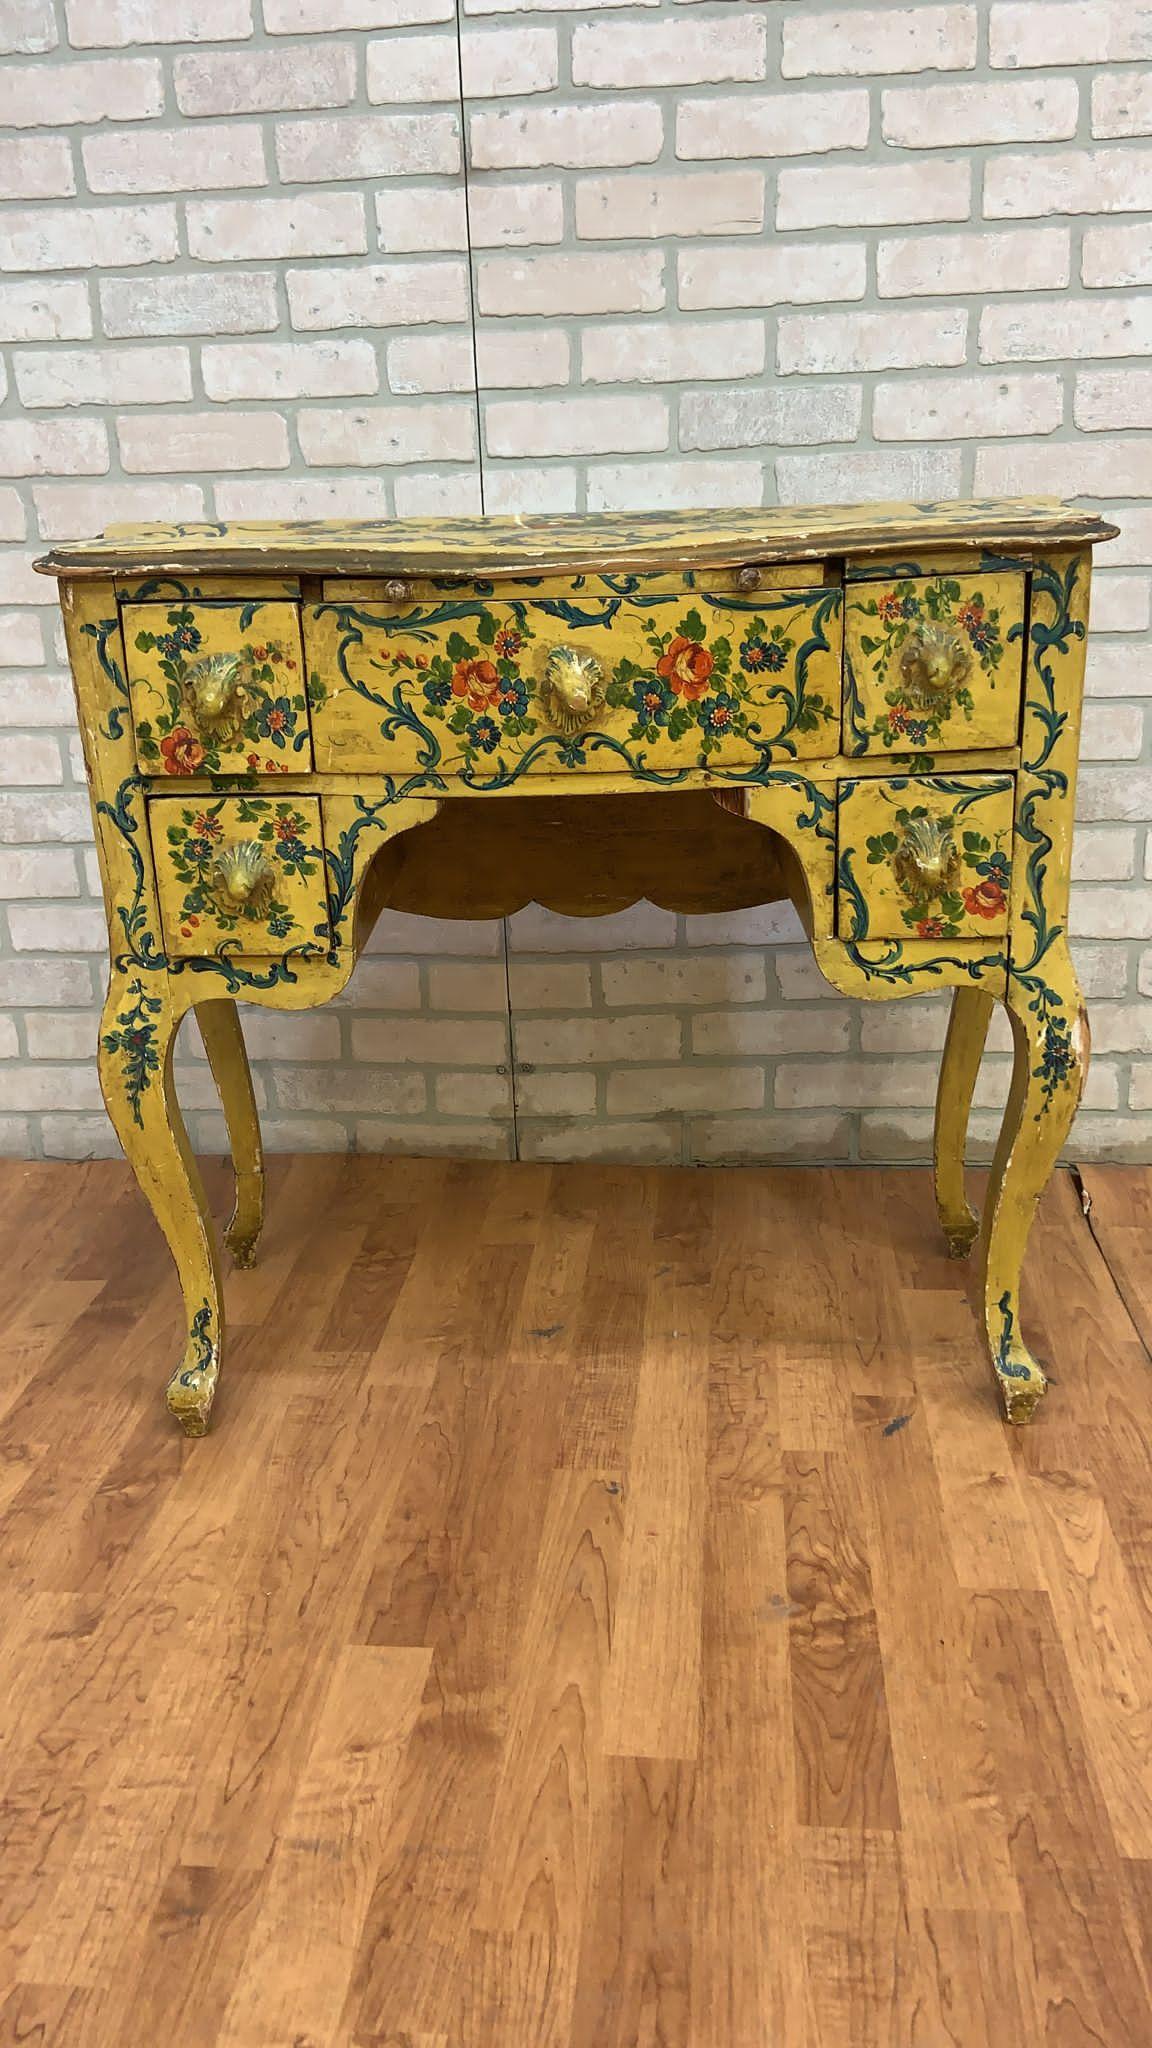 Wood Antique Rococo Style Venetian Hand Painted Vanity Desk & Side Tables, Set of 3 For Sale